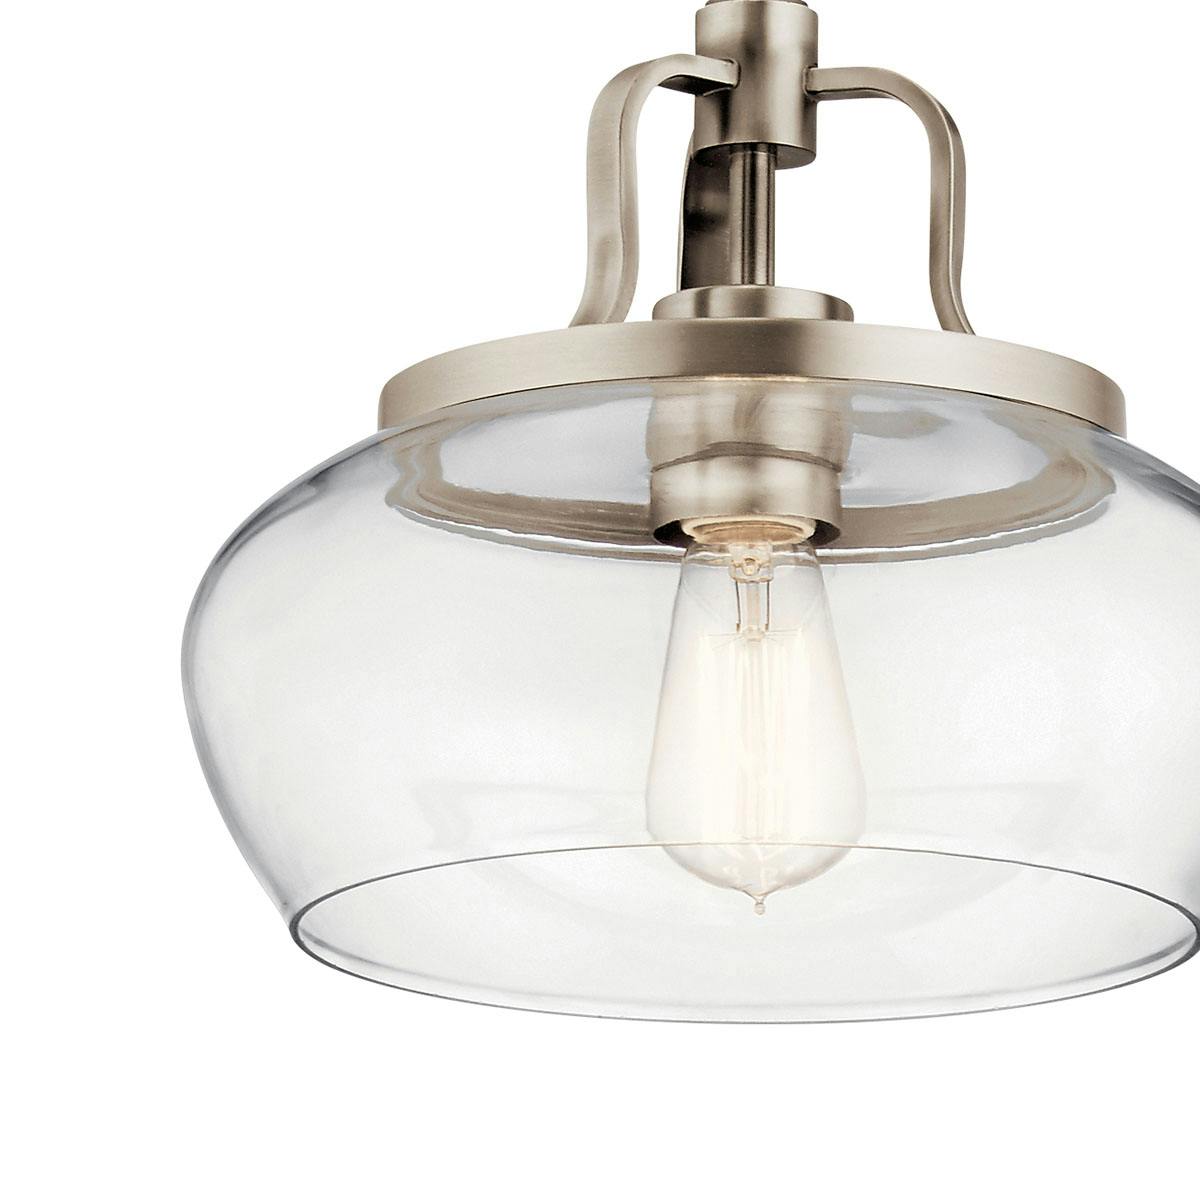 Close up view of the Davenport Convertible Pendant Pewter on a white background